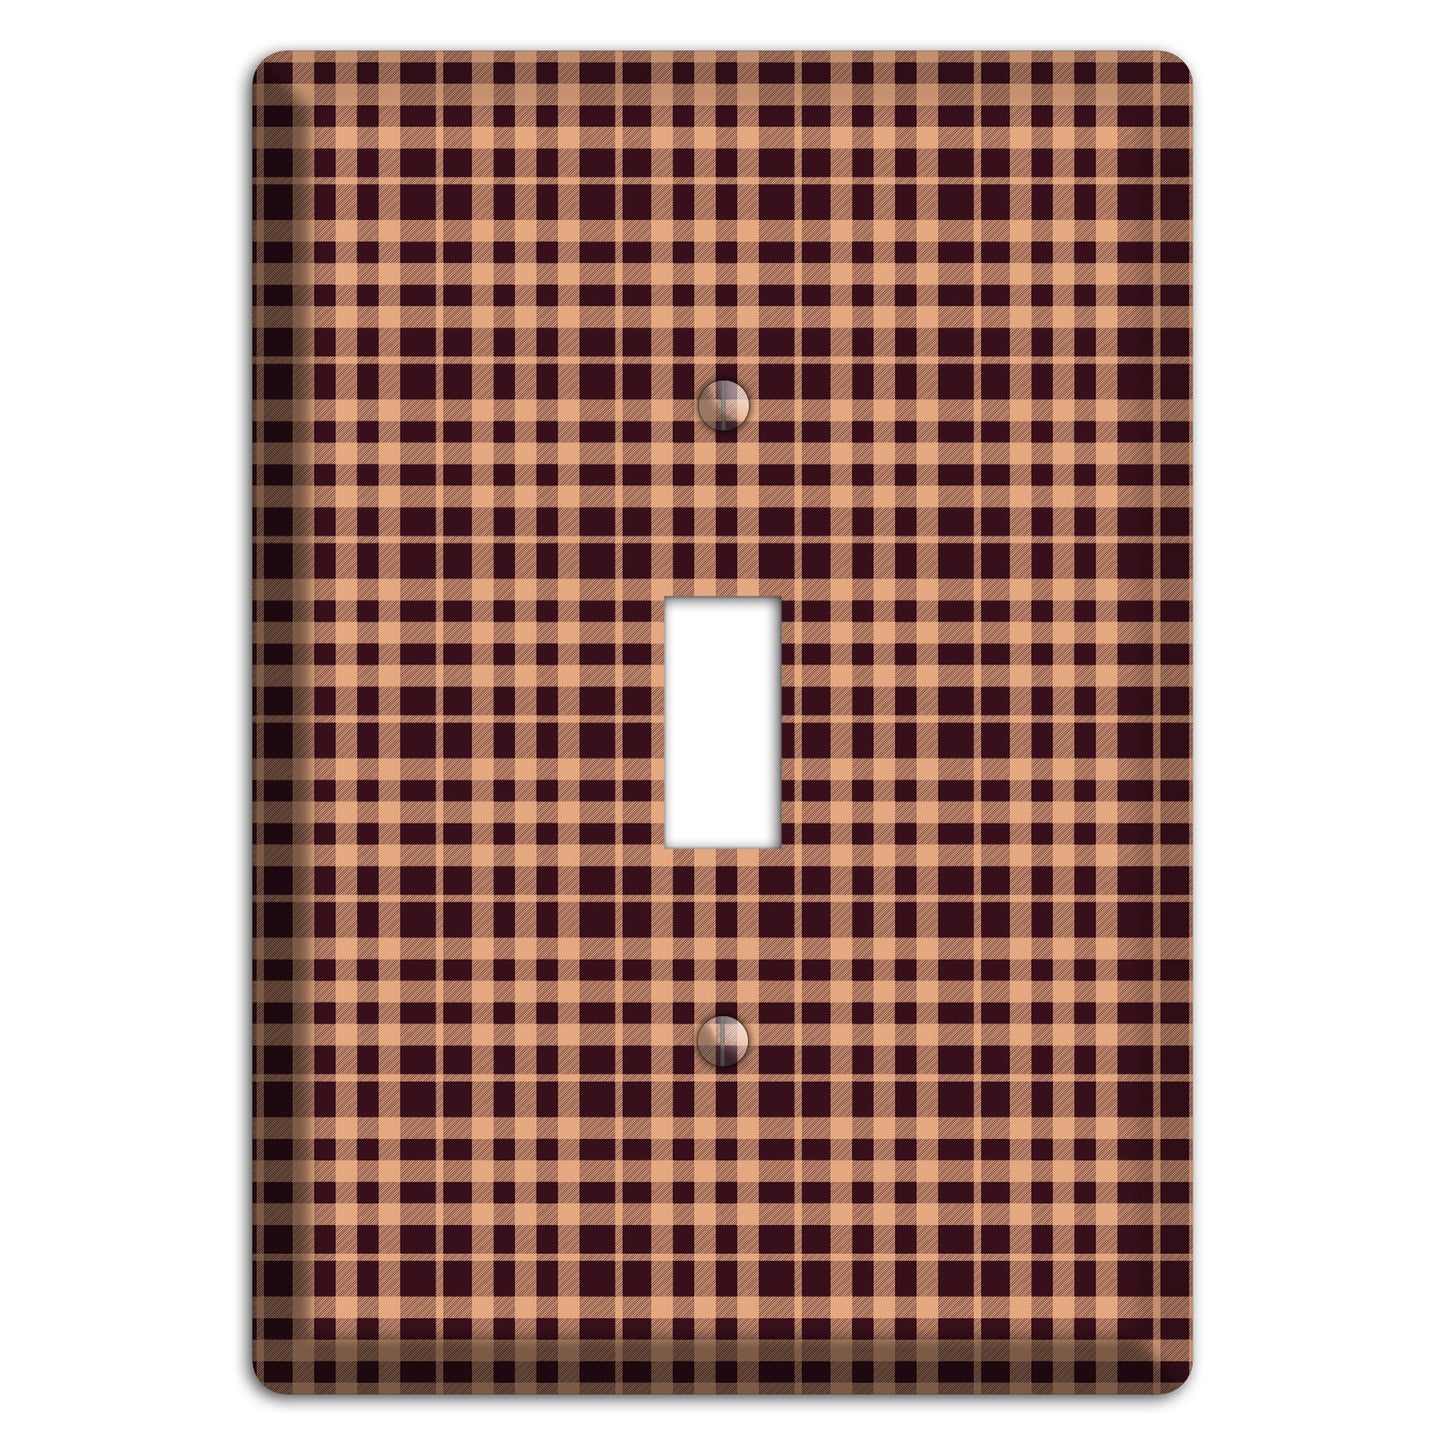 Beige and Black Plaid Cover Plates